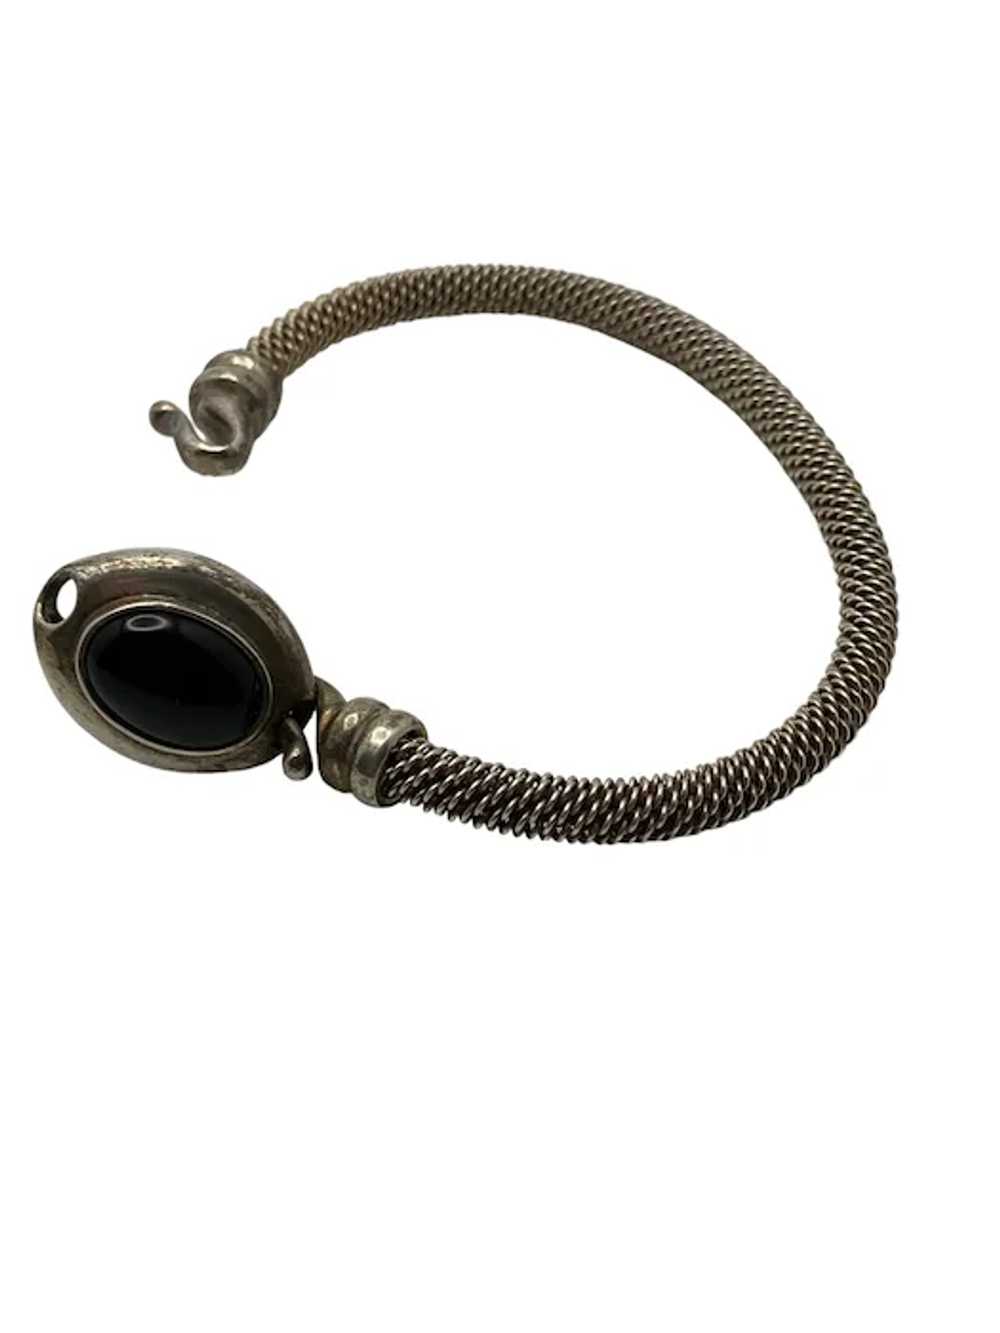 Joseph Esposito Sterling Silver and Onyx Bracelet - image 2